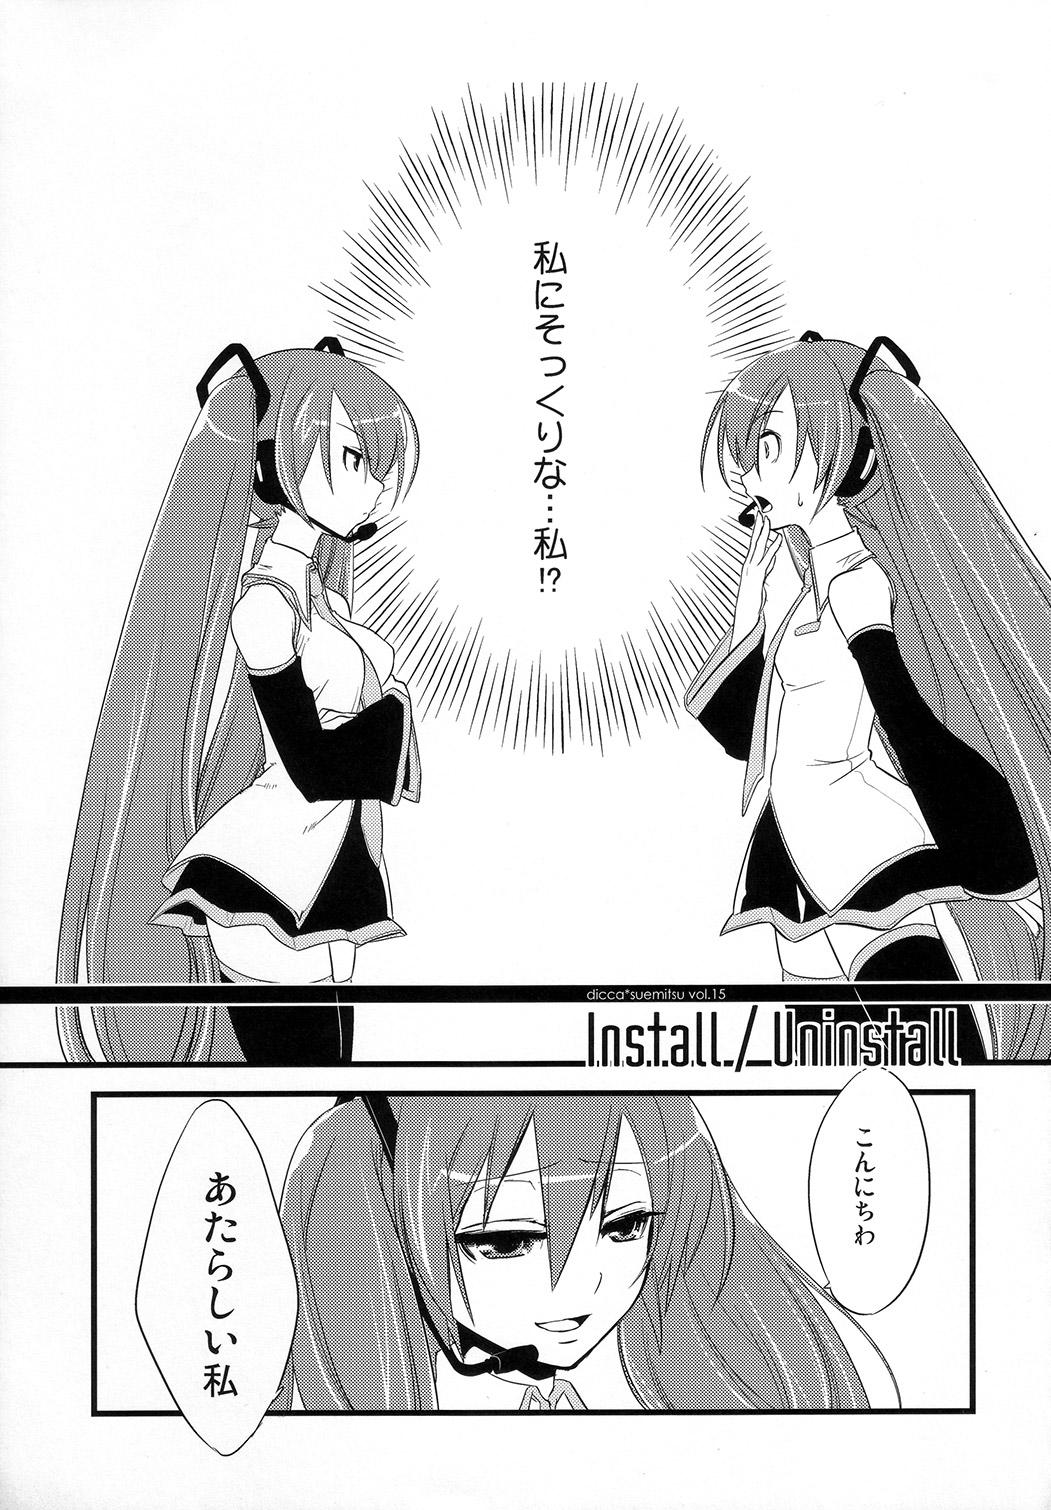 Penetration Install/Uninstall - Vocaloid Boys - Page 10